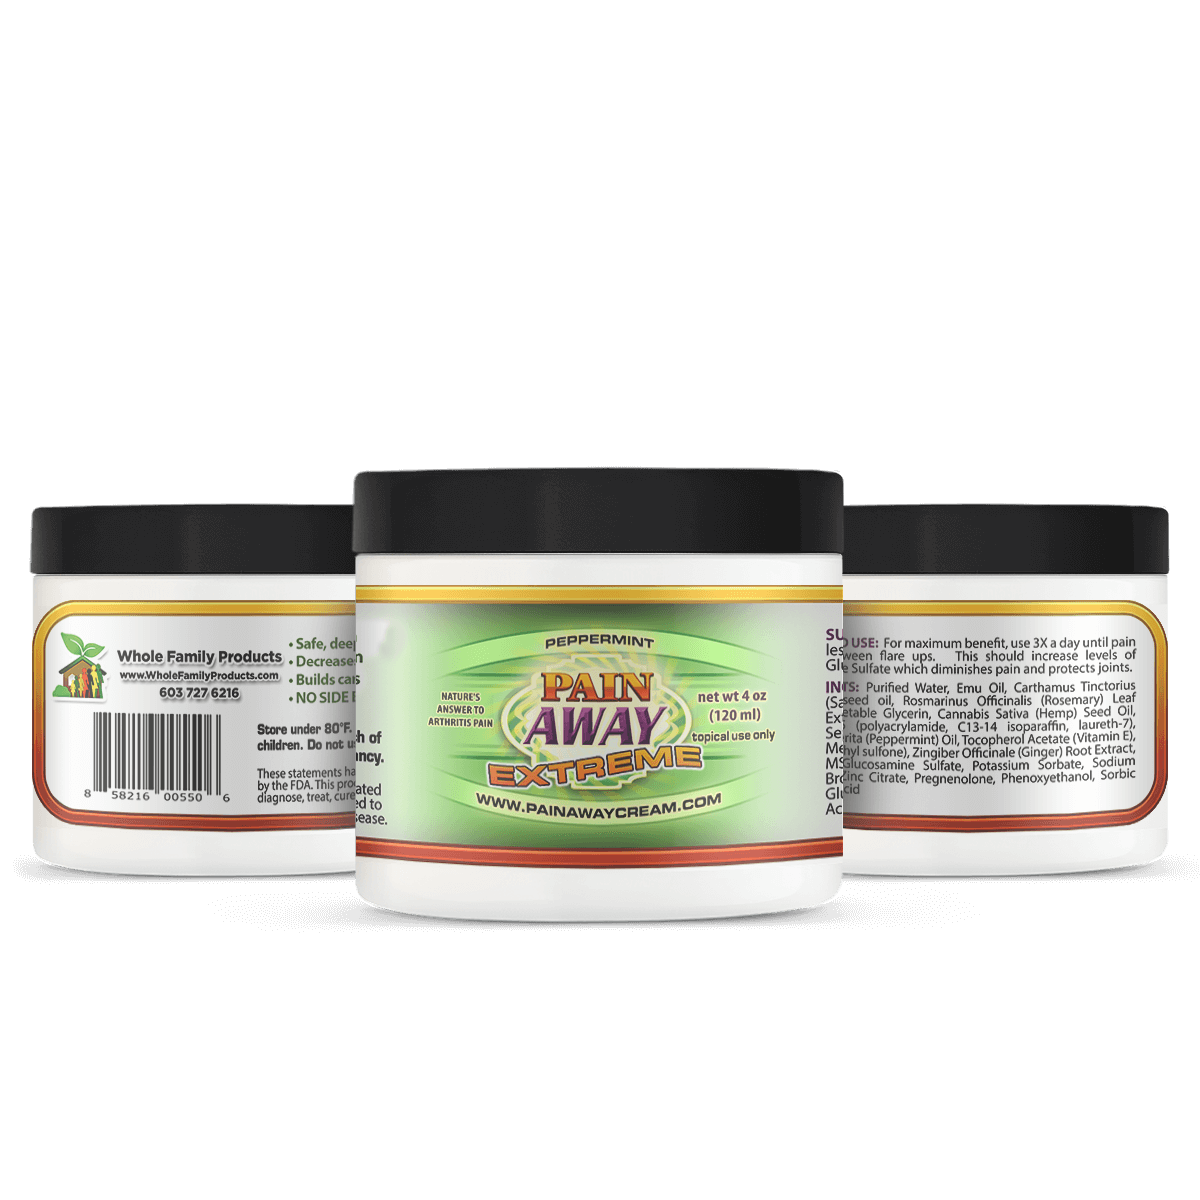 Pain Away Peppermint Extreme 4oz Jar Best Pain Relief Cream for Arthritis & Joint Pain